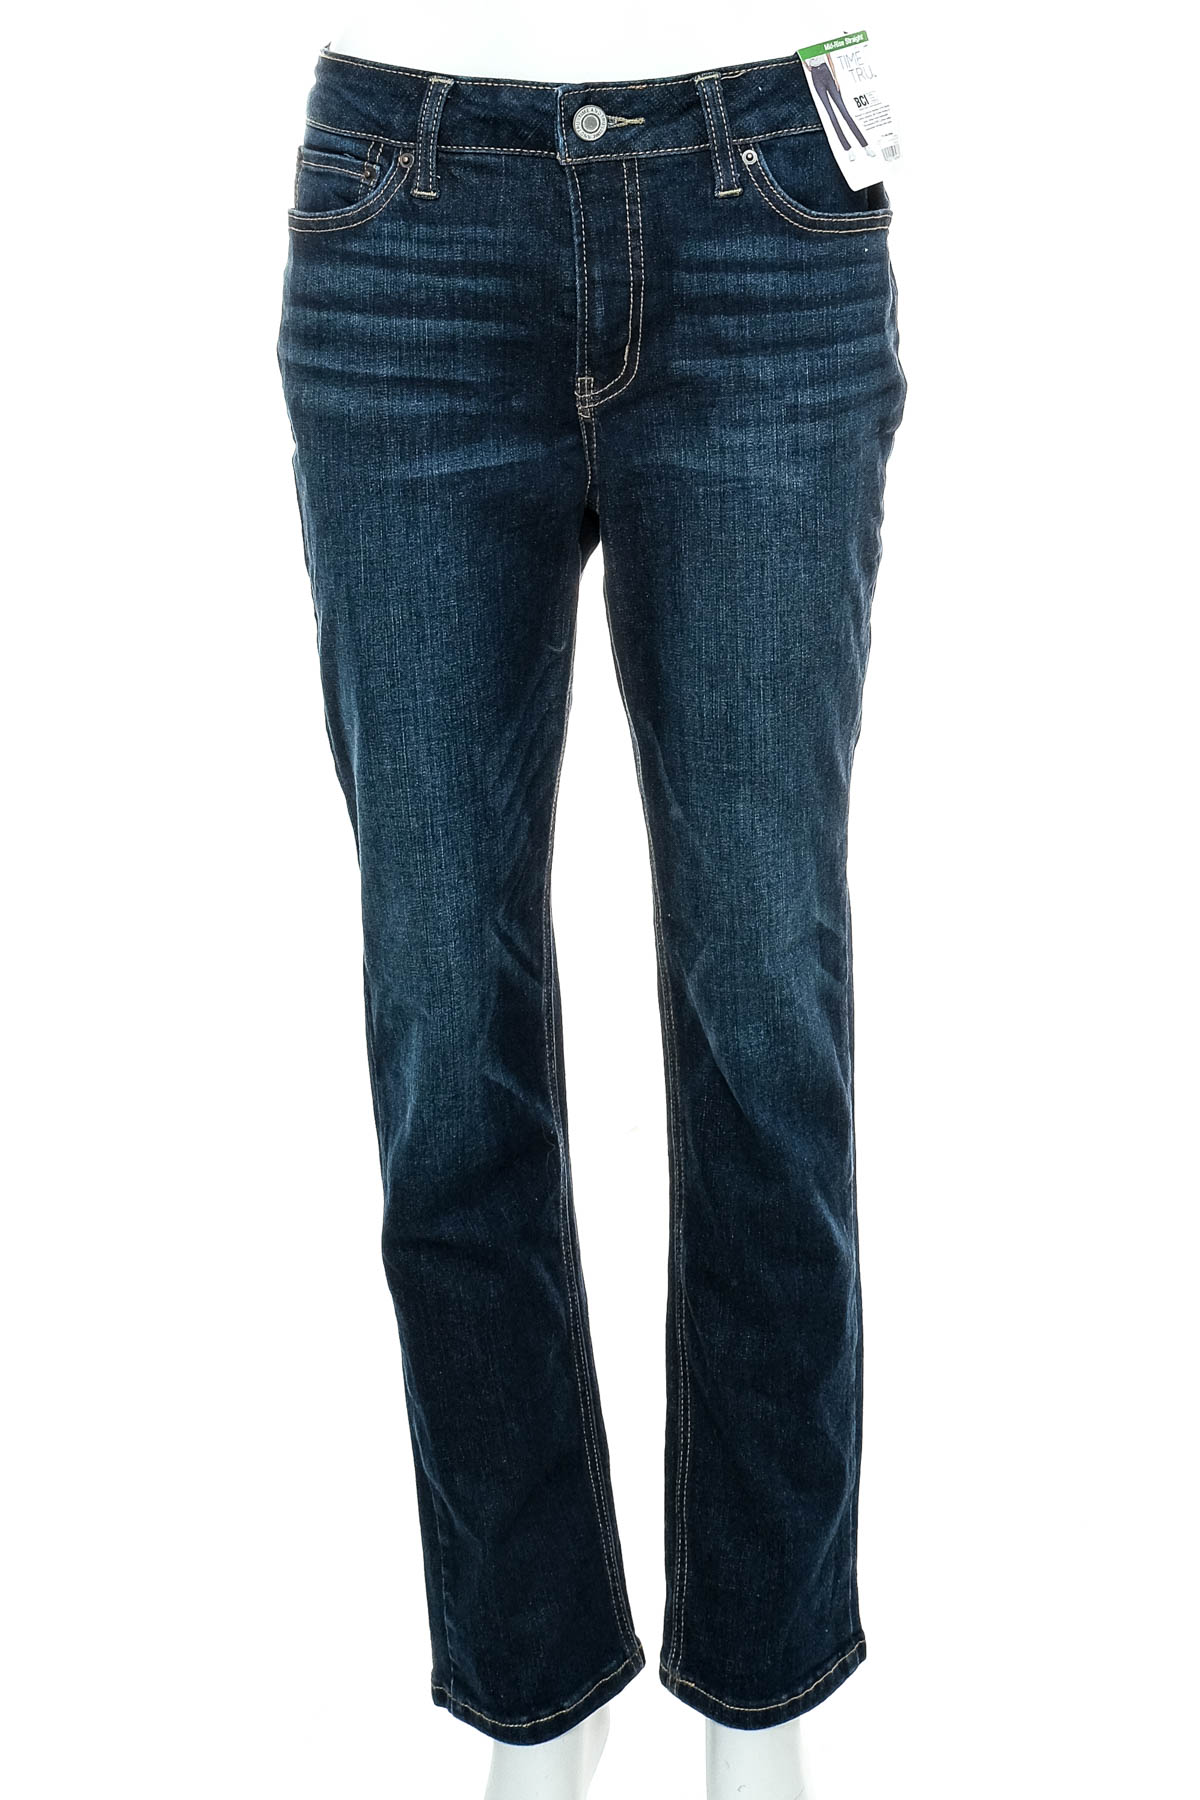 Women's jeans - TIME and TRU - 0